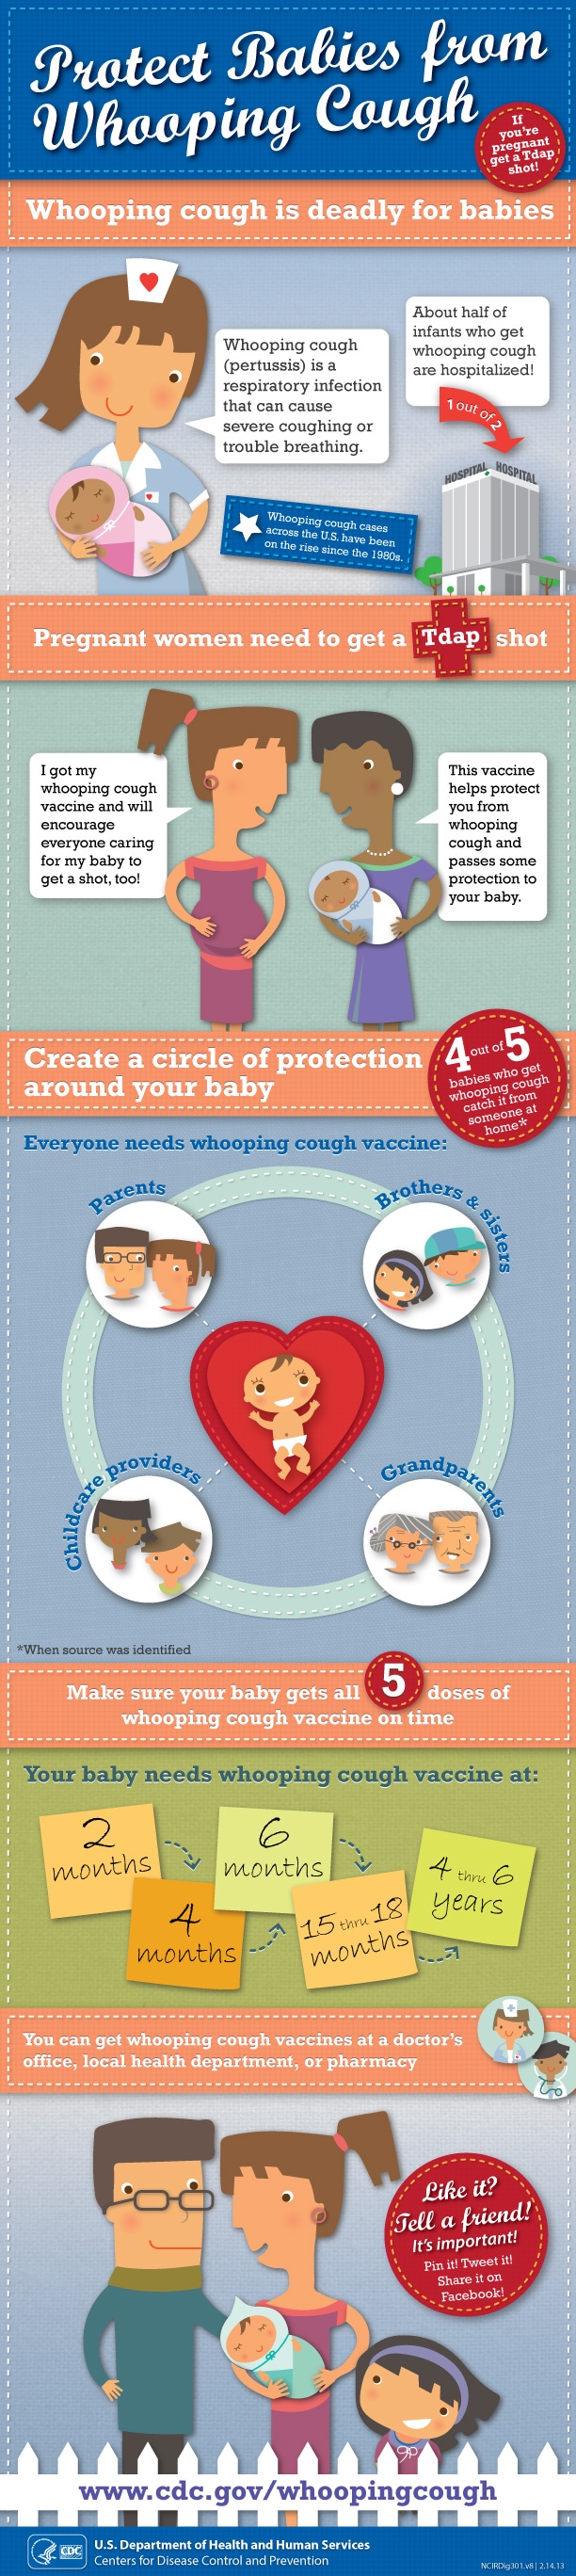 Protect Babies from Whooping Cough Infographic  Vaccines  CDC